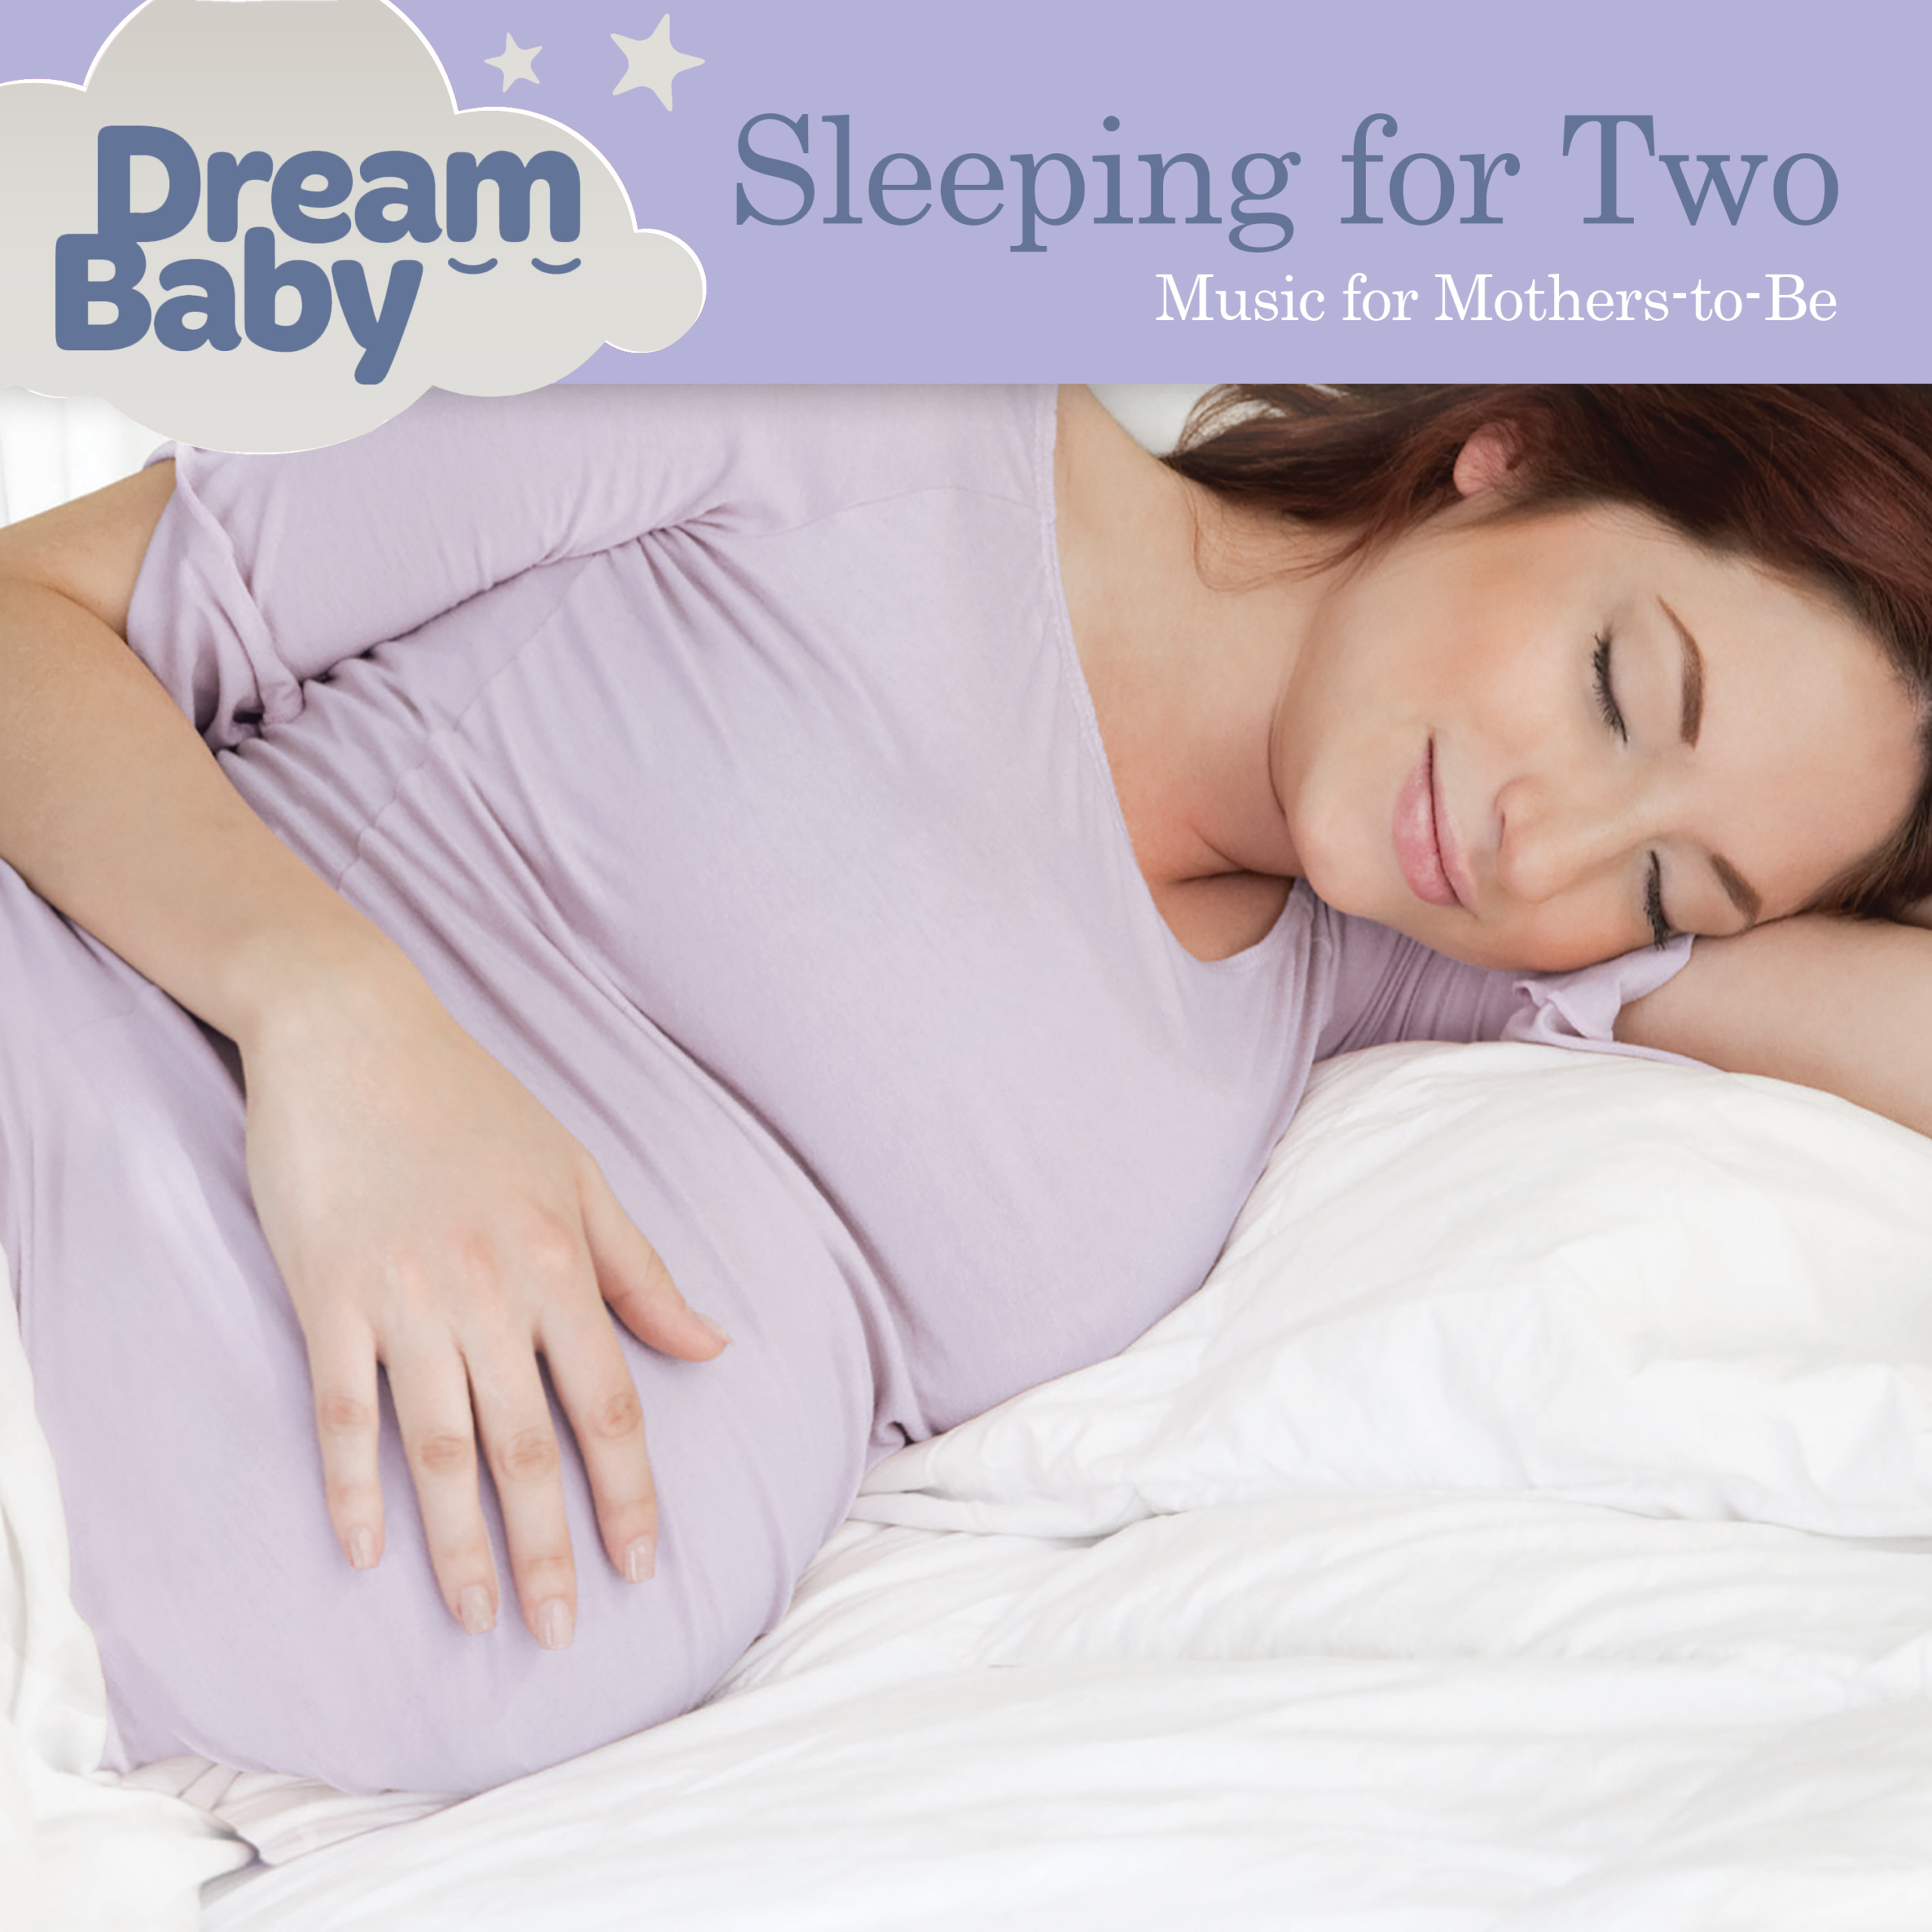 Sleeping for Two - Music for Mothers-to-Be